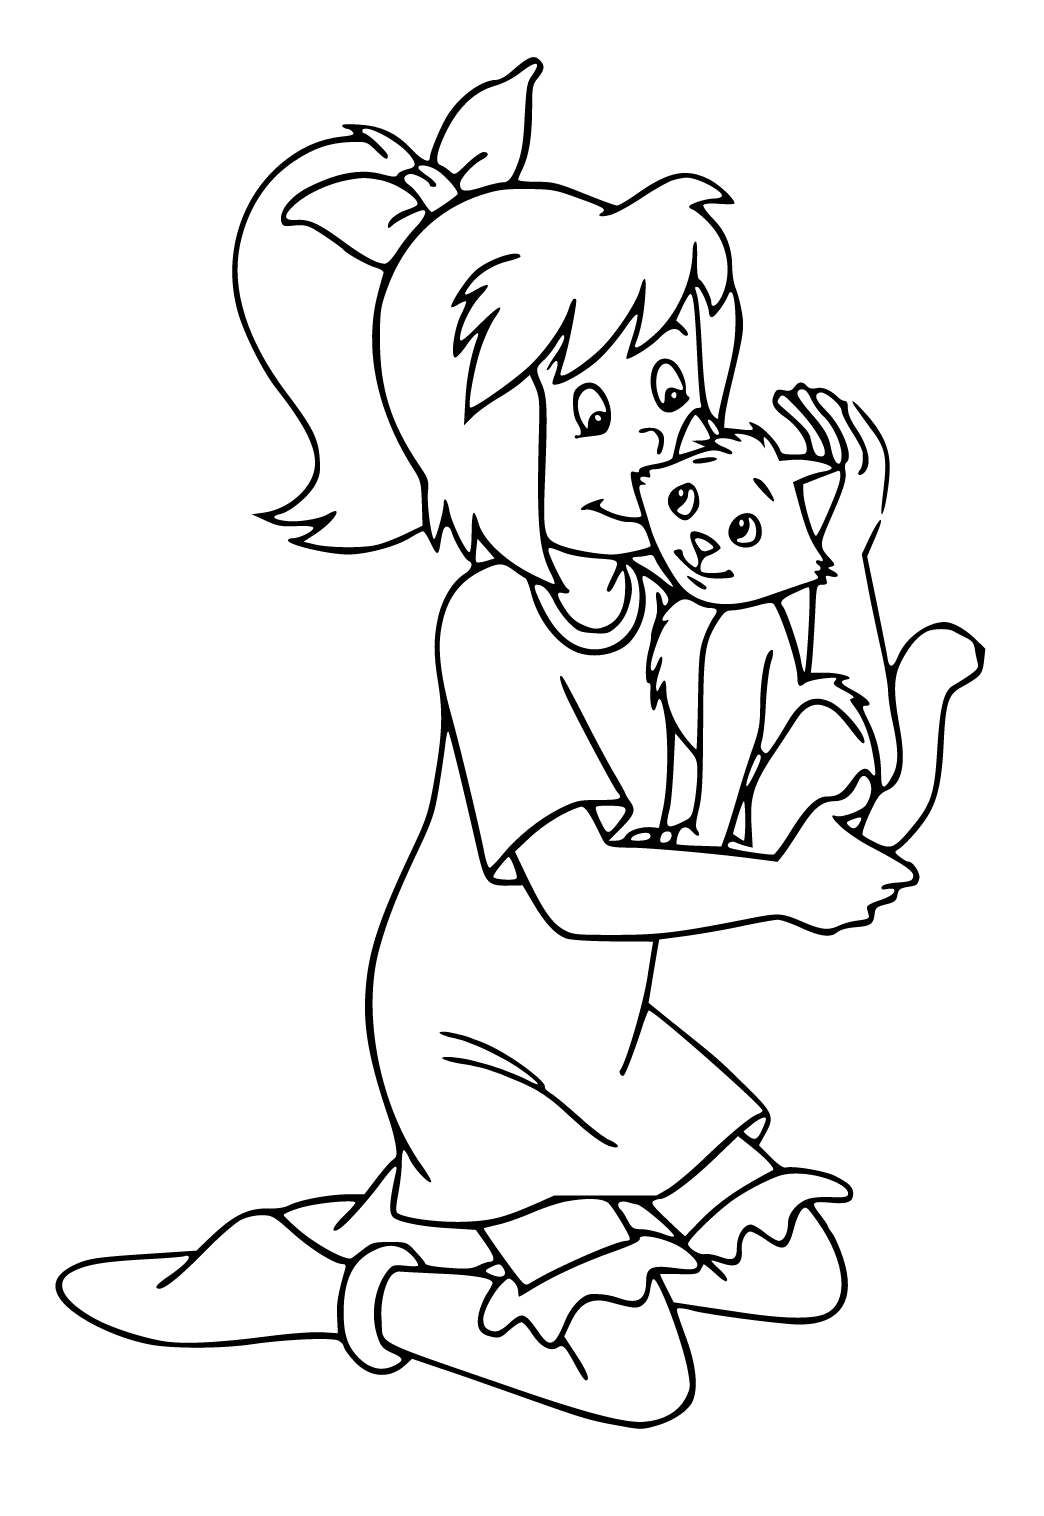 Free Printable Bibi Blocksberg Cat Coloring Page for Adults and